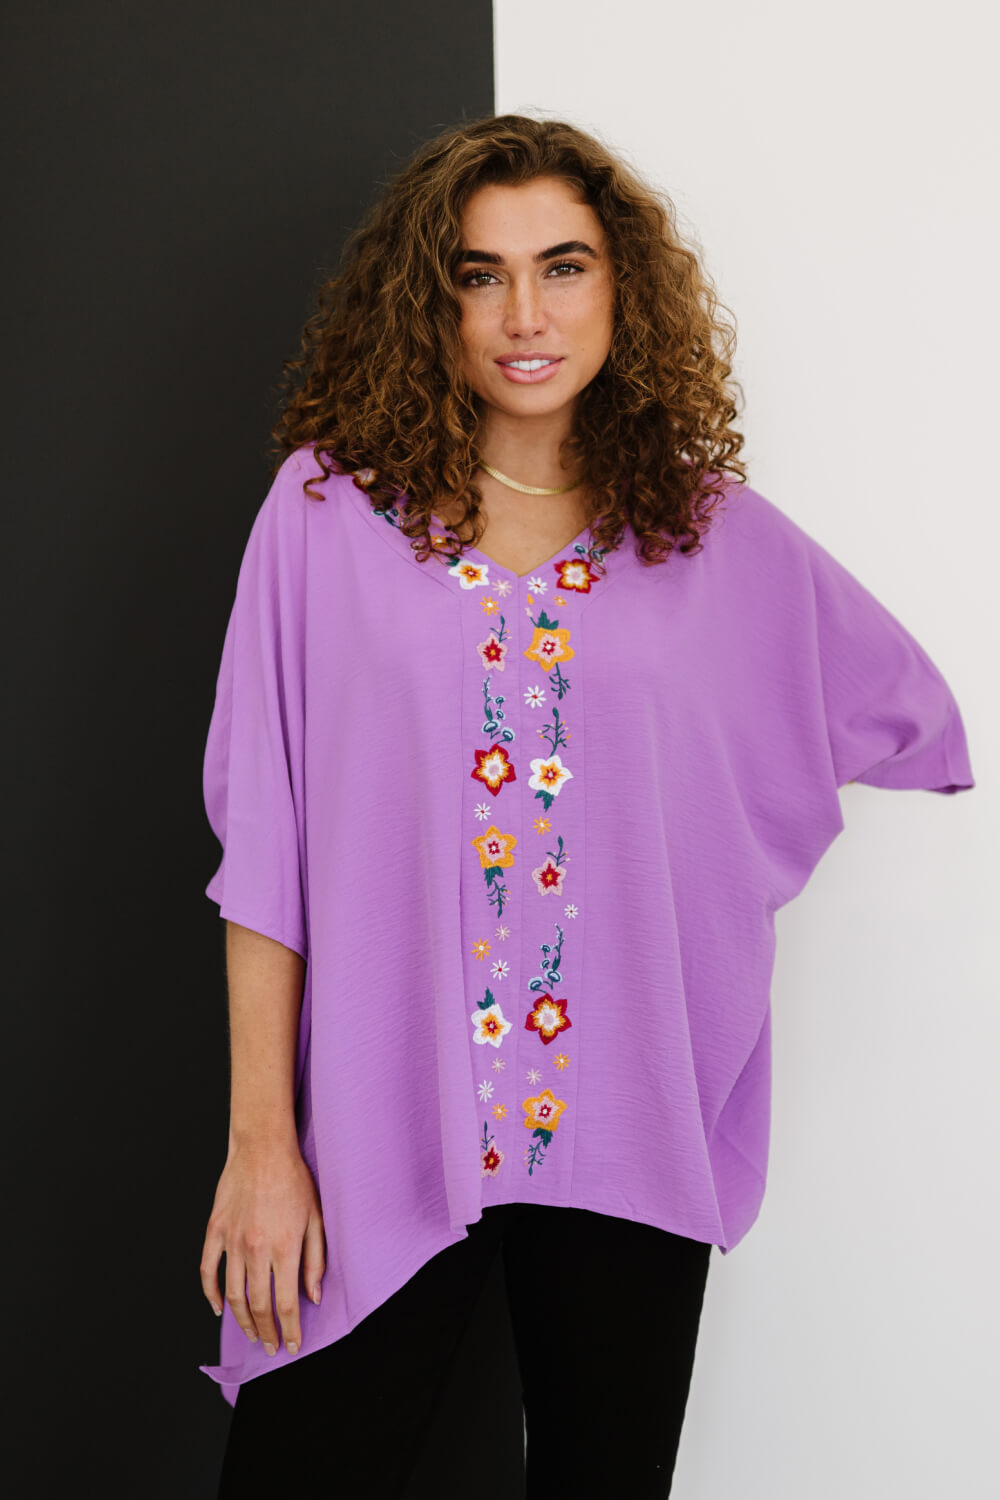 Wanderer Full Size Run Embroidered Poncho Top